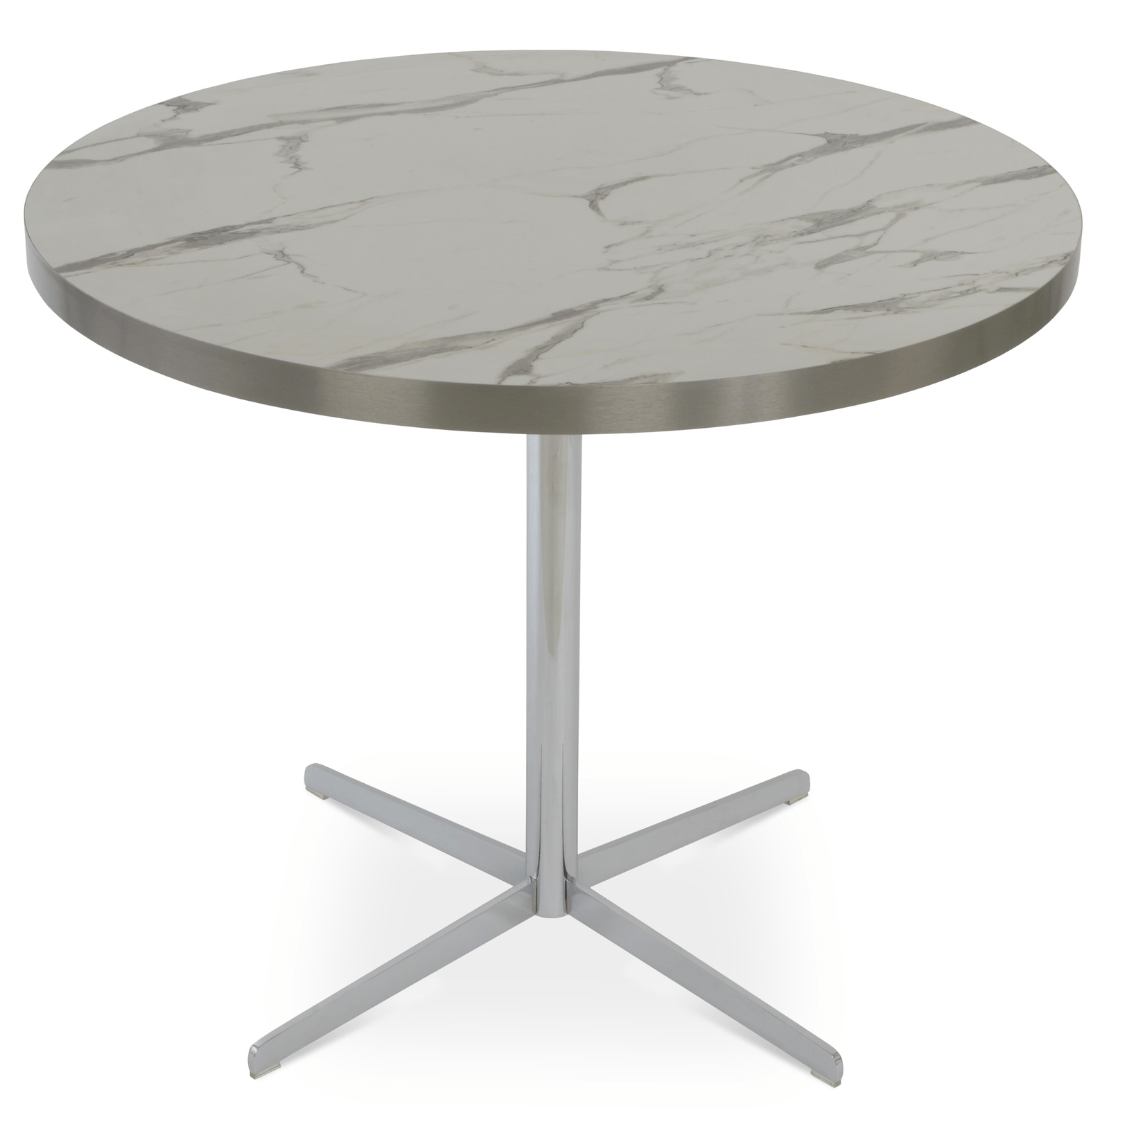 Laminate Top Diana Round Restaurant Tables - Your Bar Stools Canada